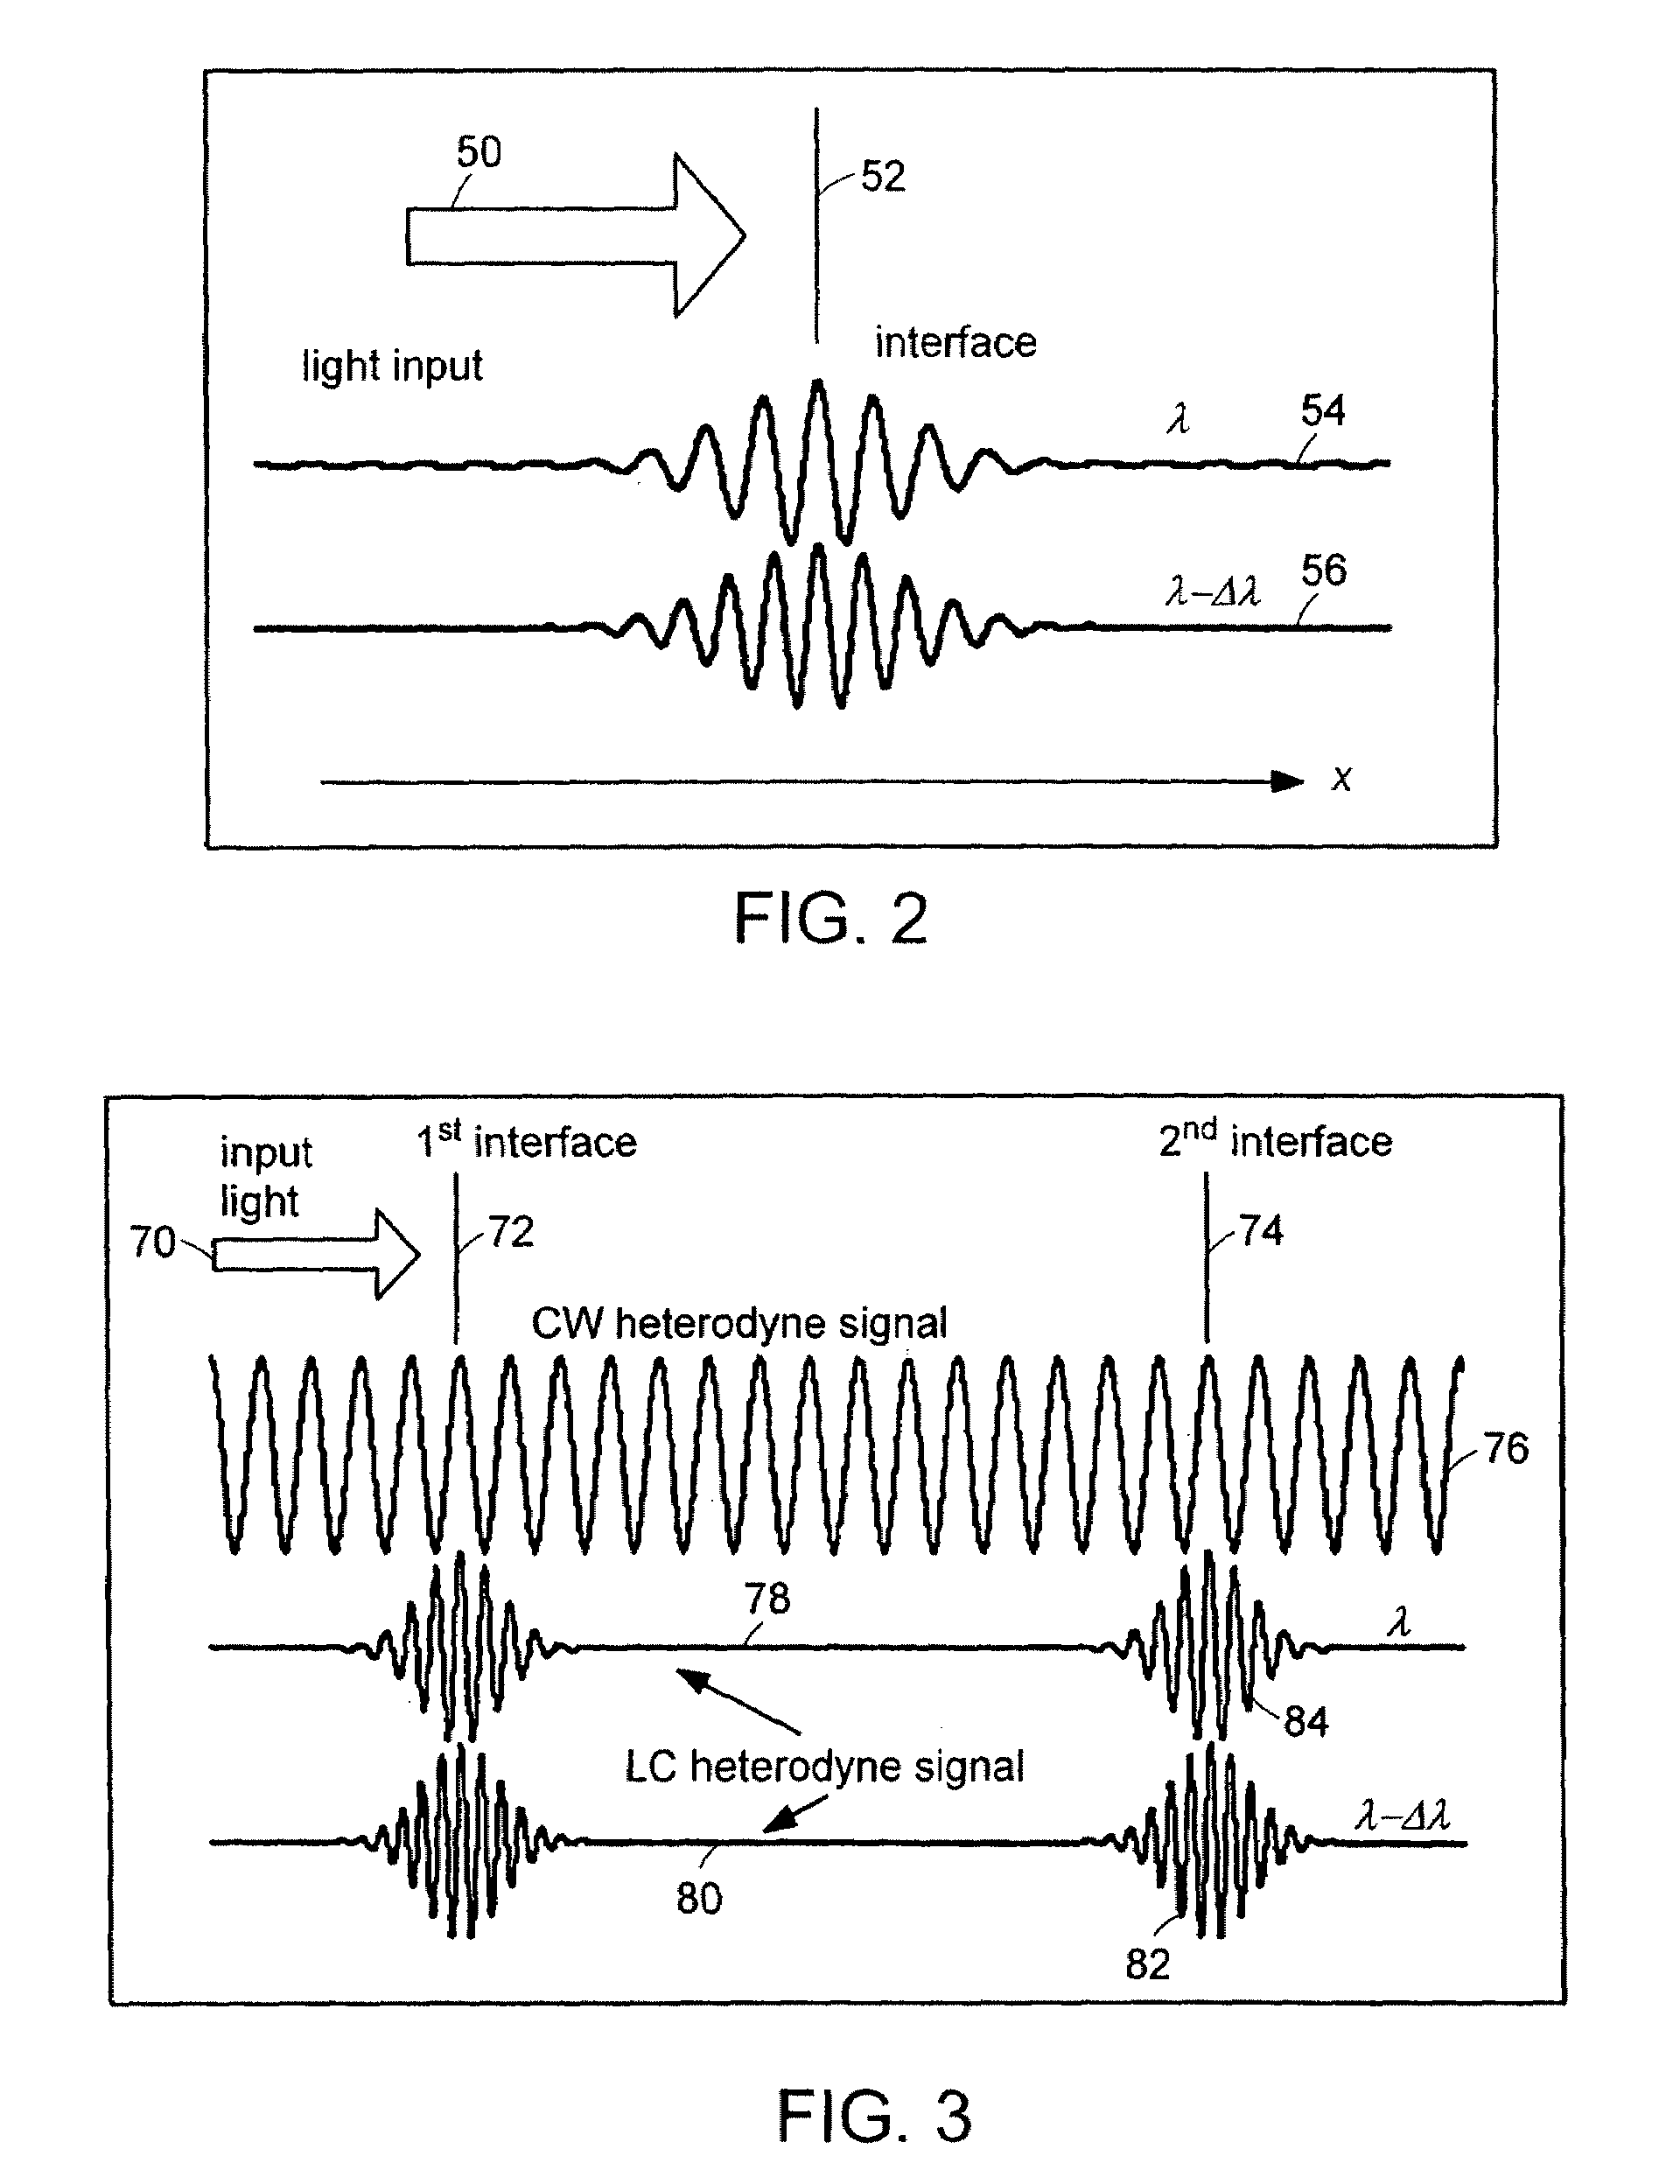 Systems and methods for phase measurements